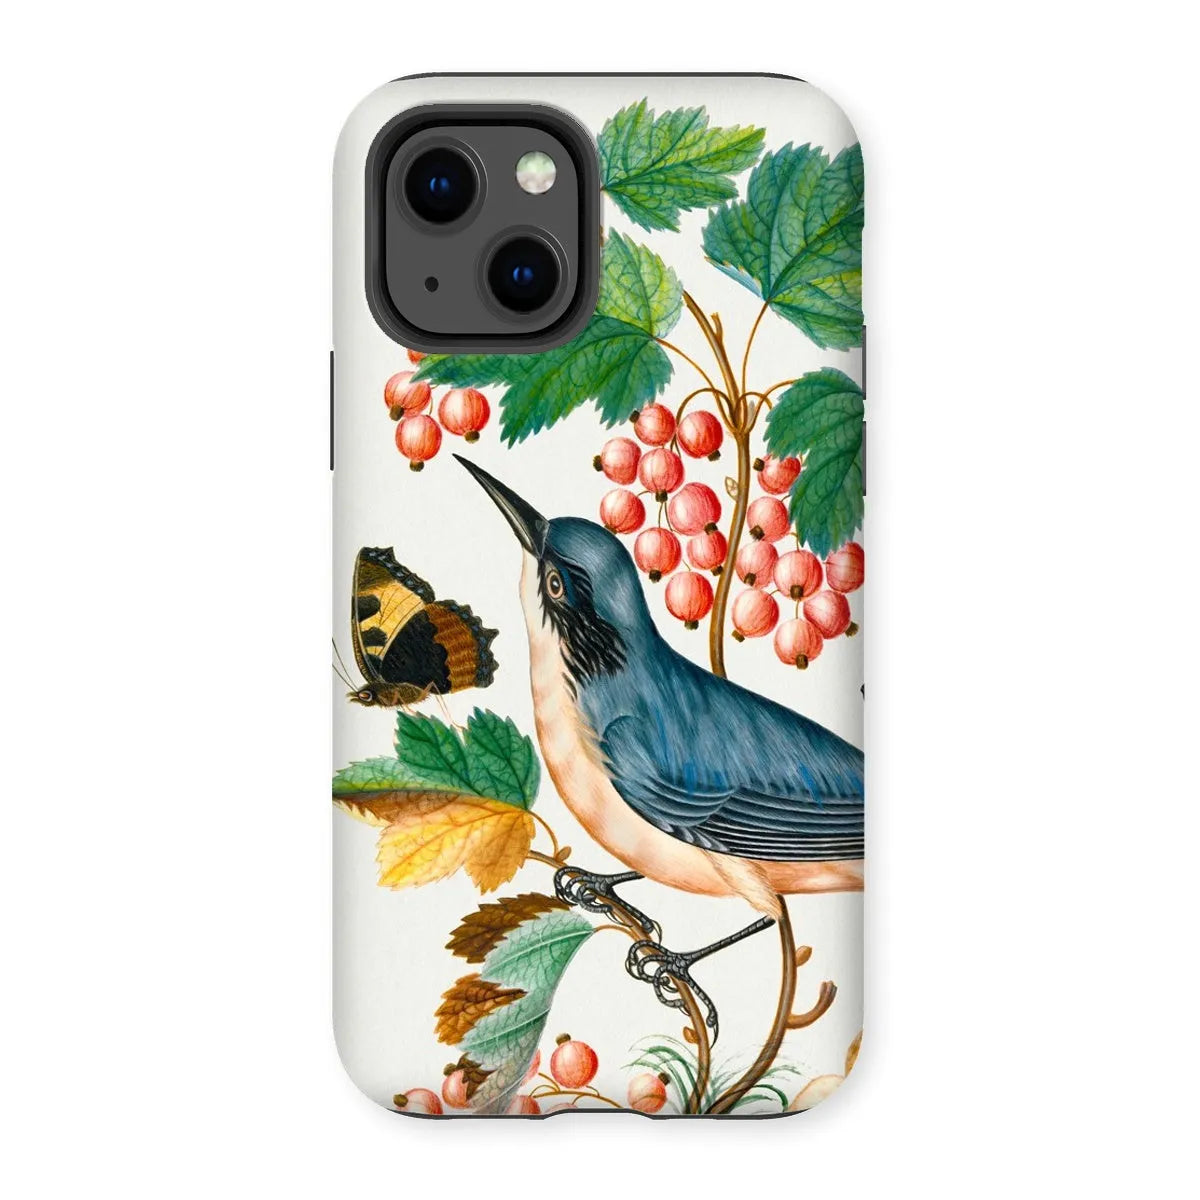 Warbler Admiral Wasps & Ants - Art Phone Case - James Bolton - Iphone 13 / Matte - Mobile Phone Cases - Aesthetic Art